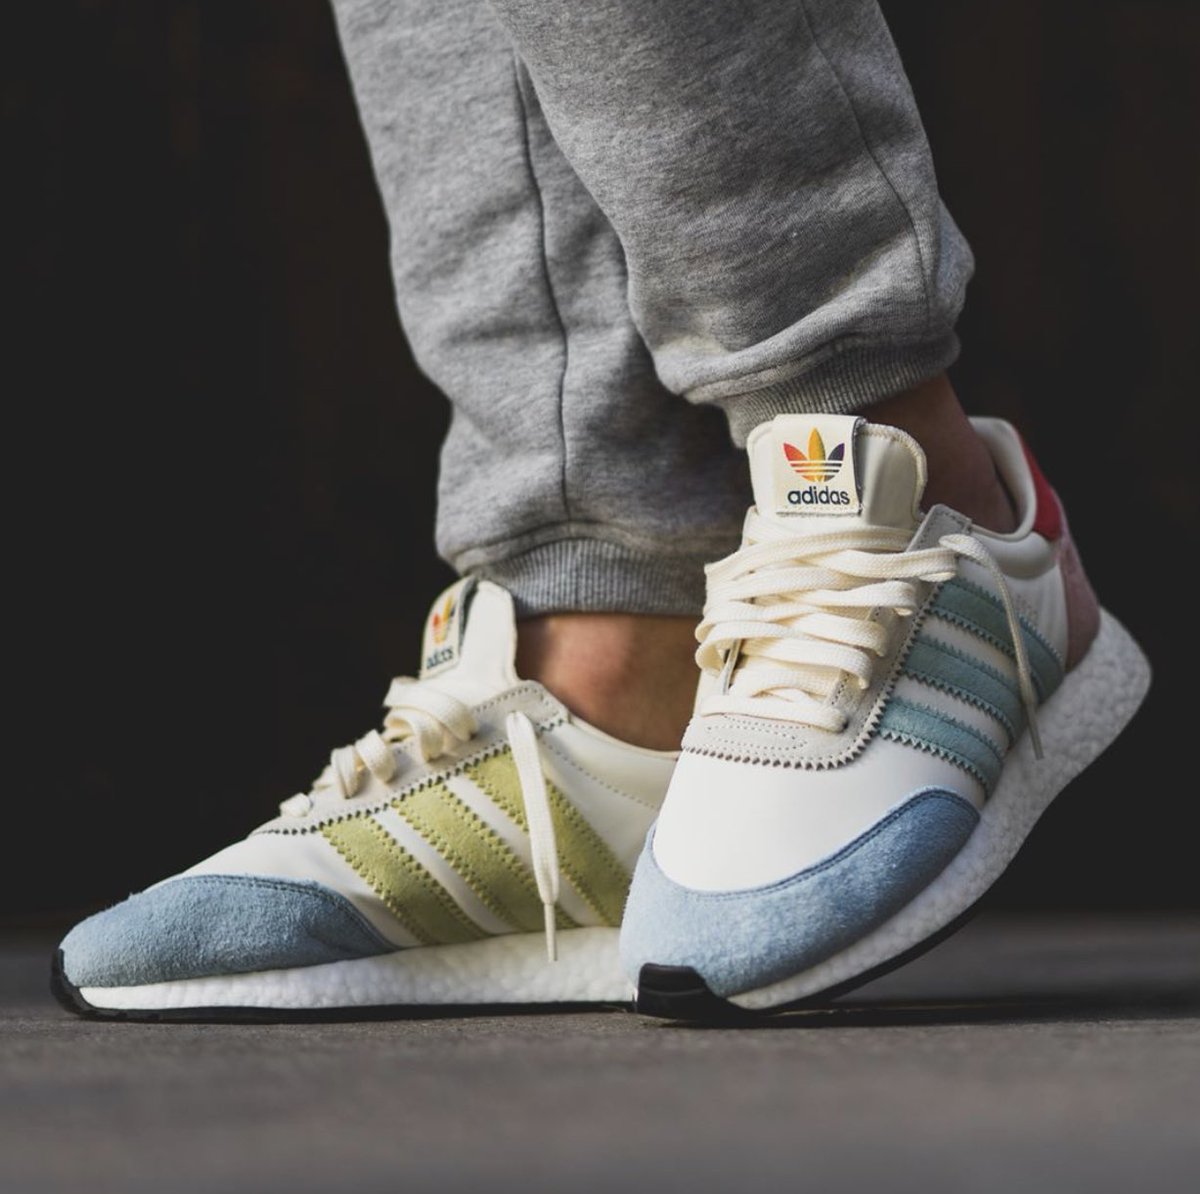 Available: adidas I-5923 "Pride" Sneaker Shouts